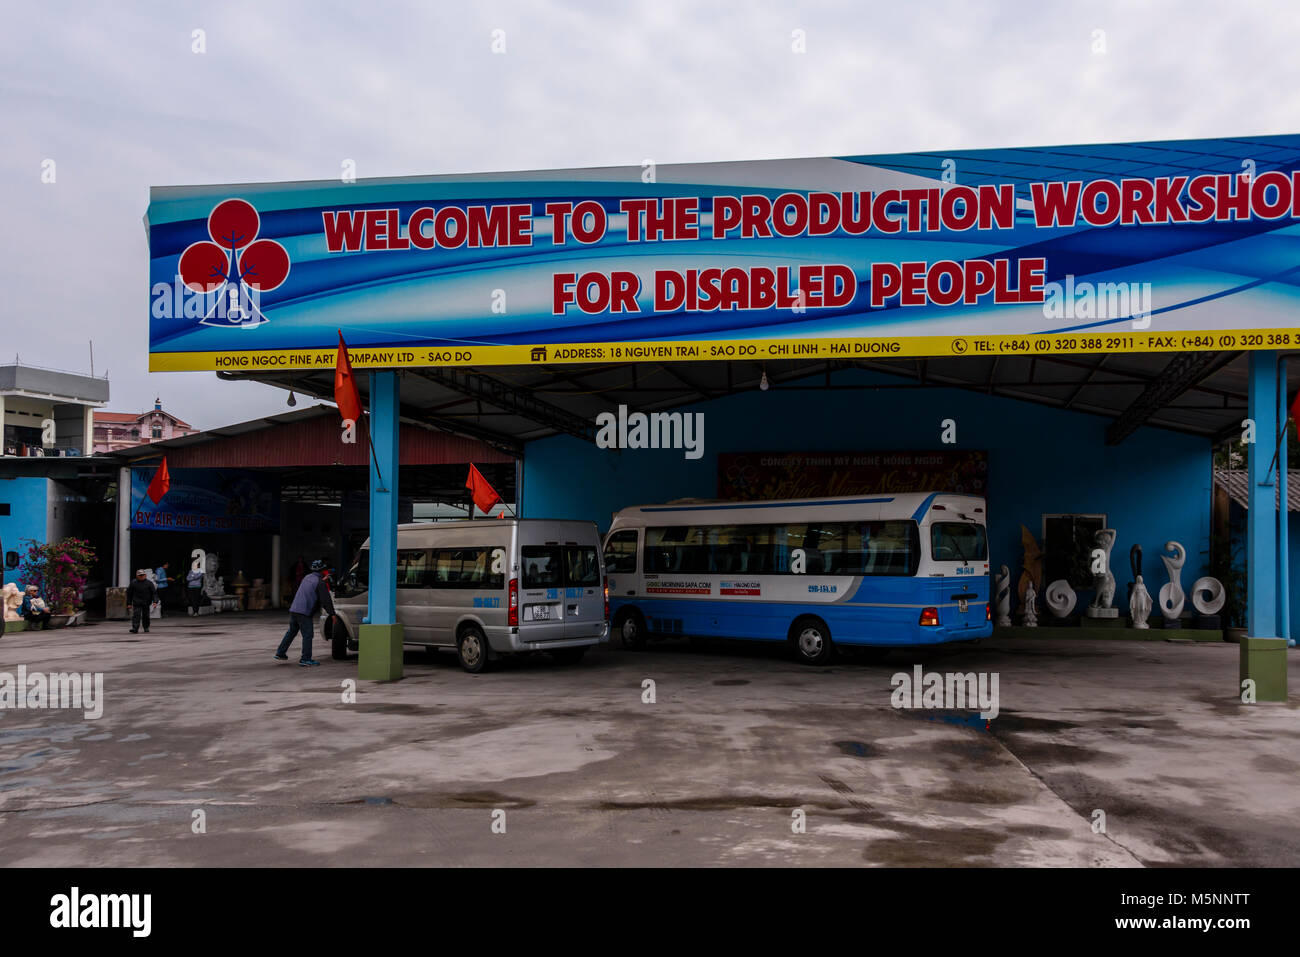 Hong Ngoc Centre for Disabled People, an overpriced tourist trap on the way to Halong Bay, Vietnam which many tour coaches stop at on the way. Stock Photo